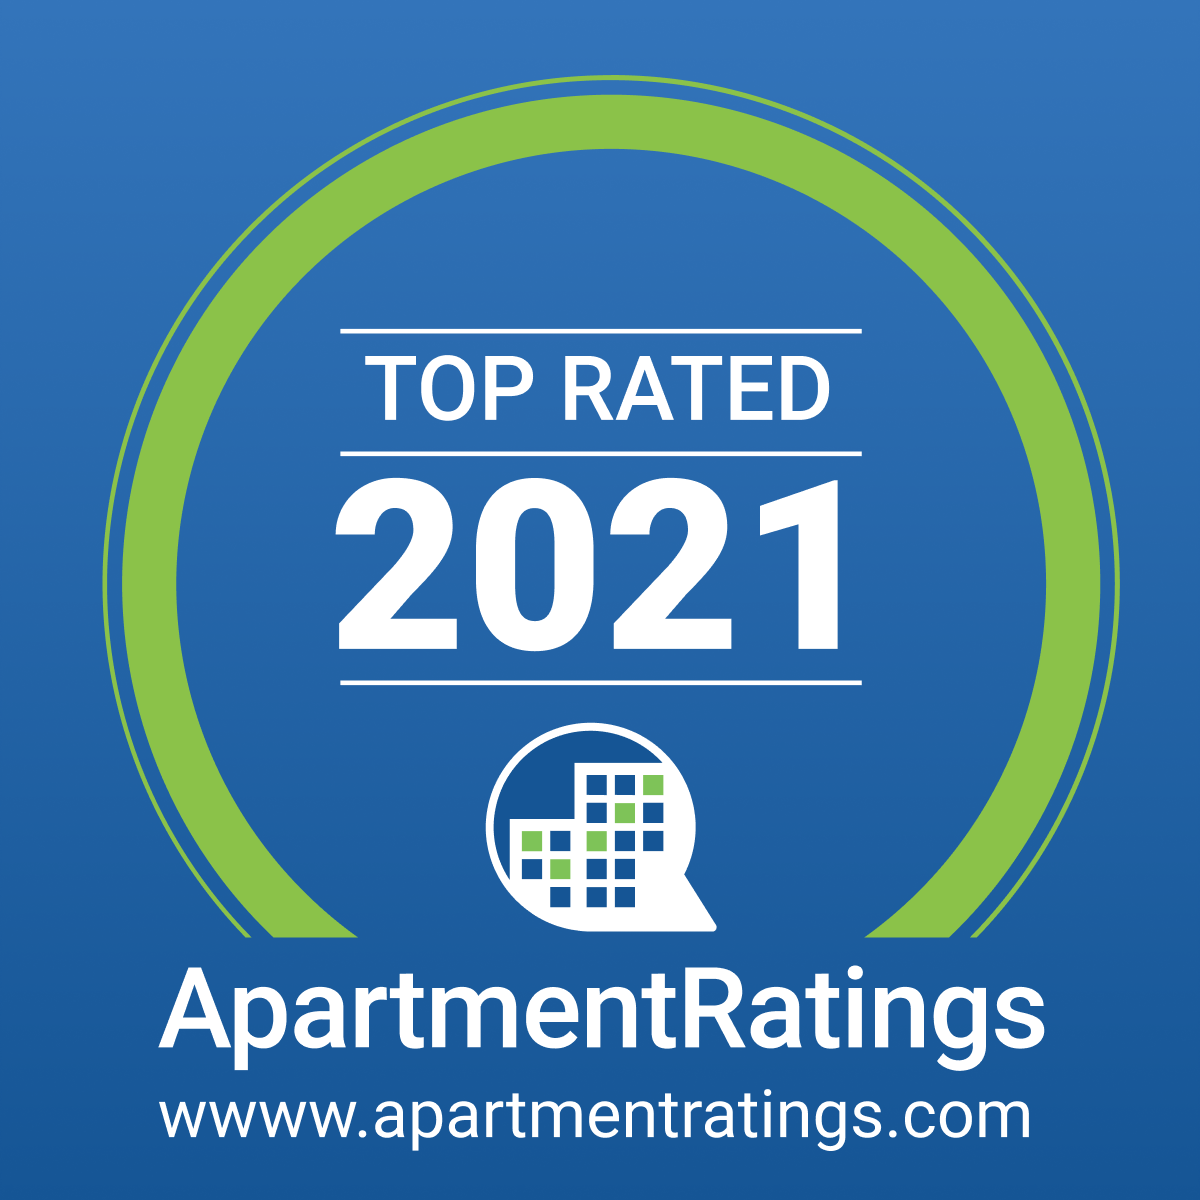 Top Rated 2021 ApartmentRatings